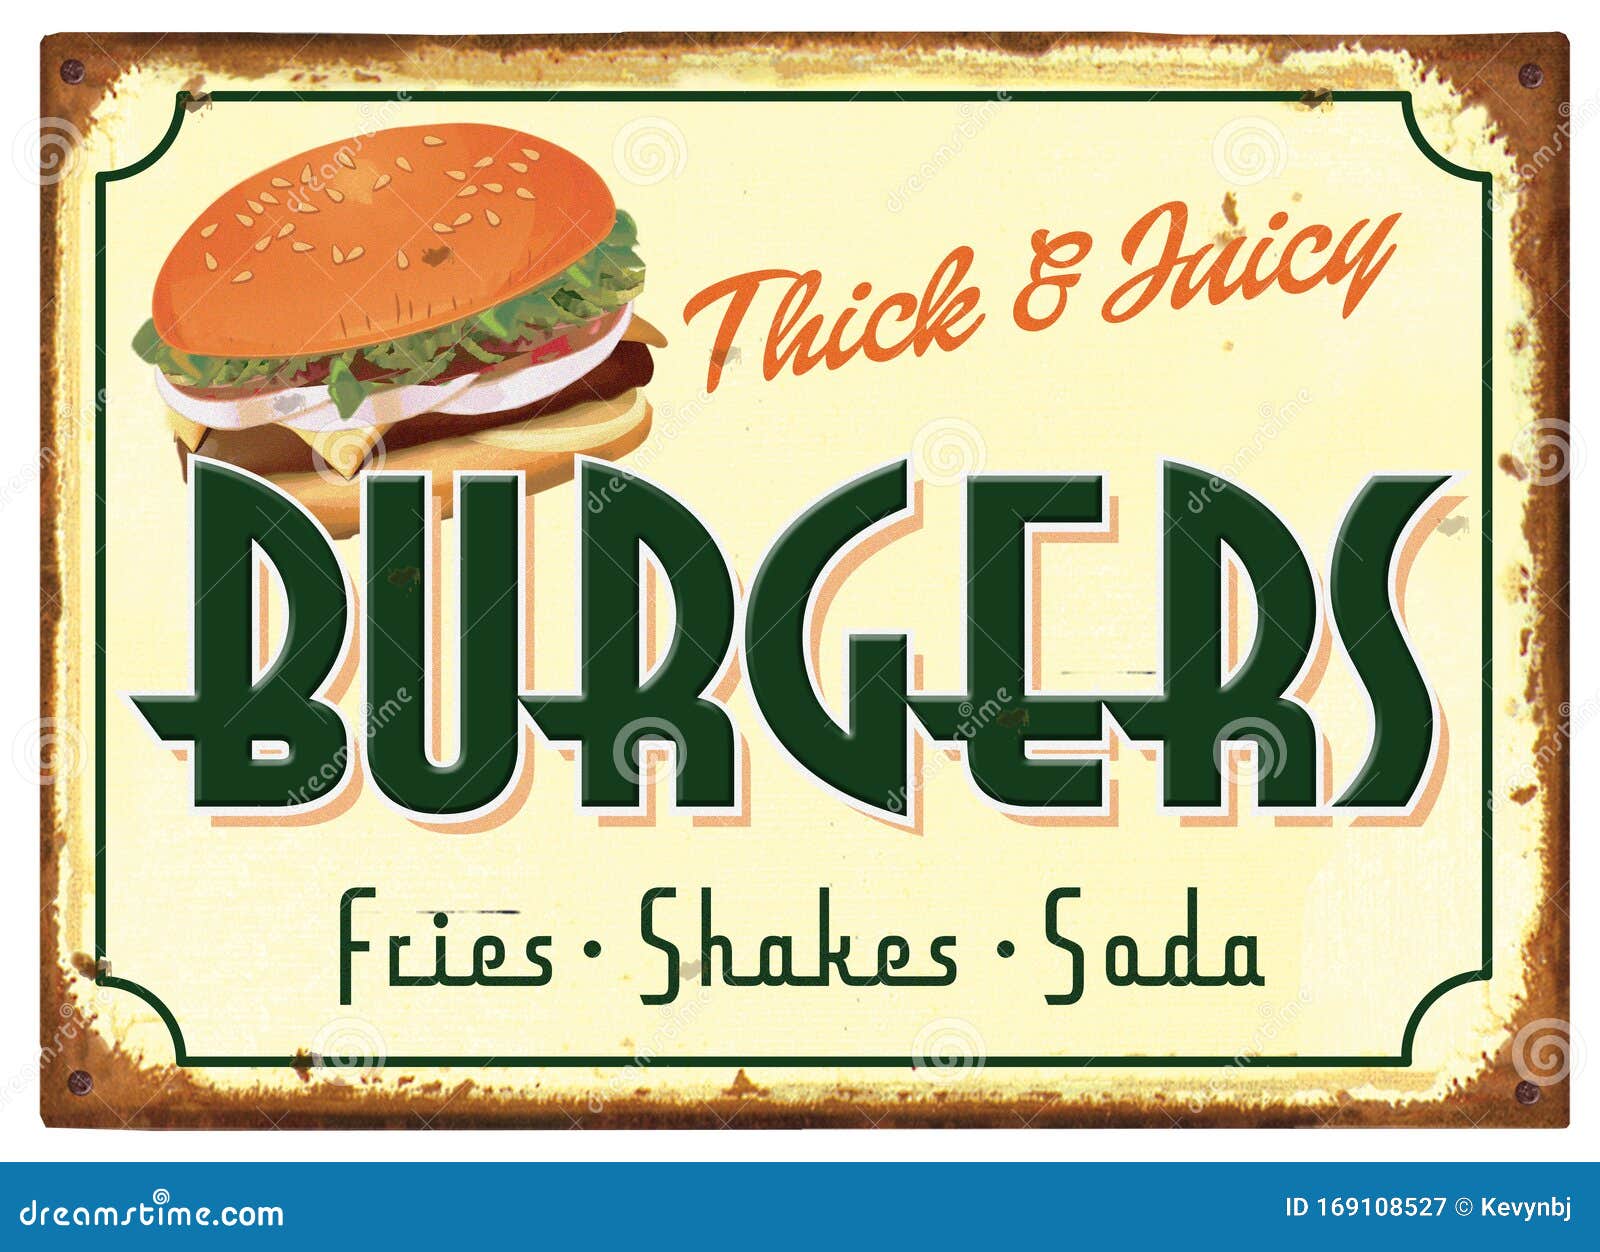 old fashioned burgers and fries sign tin retro